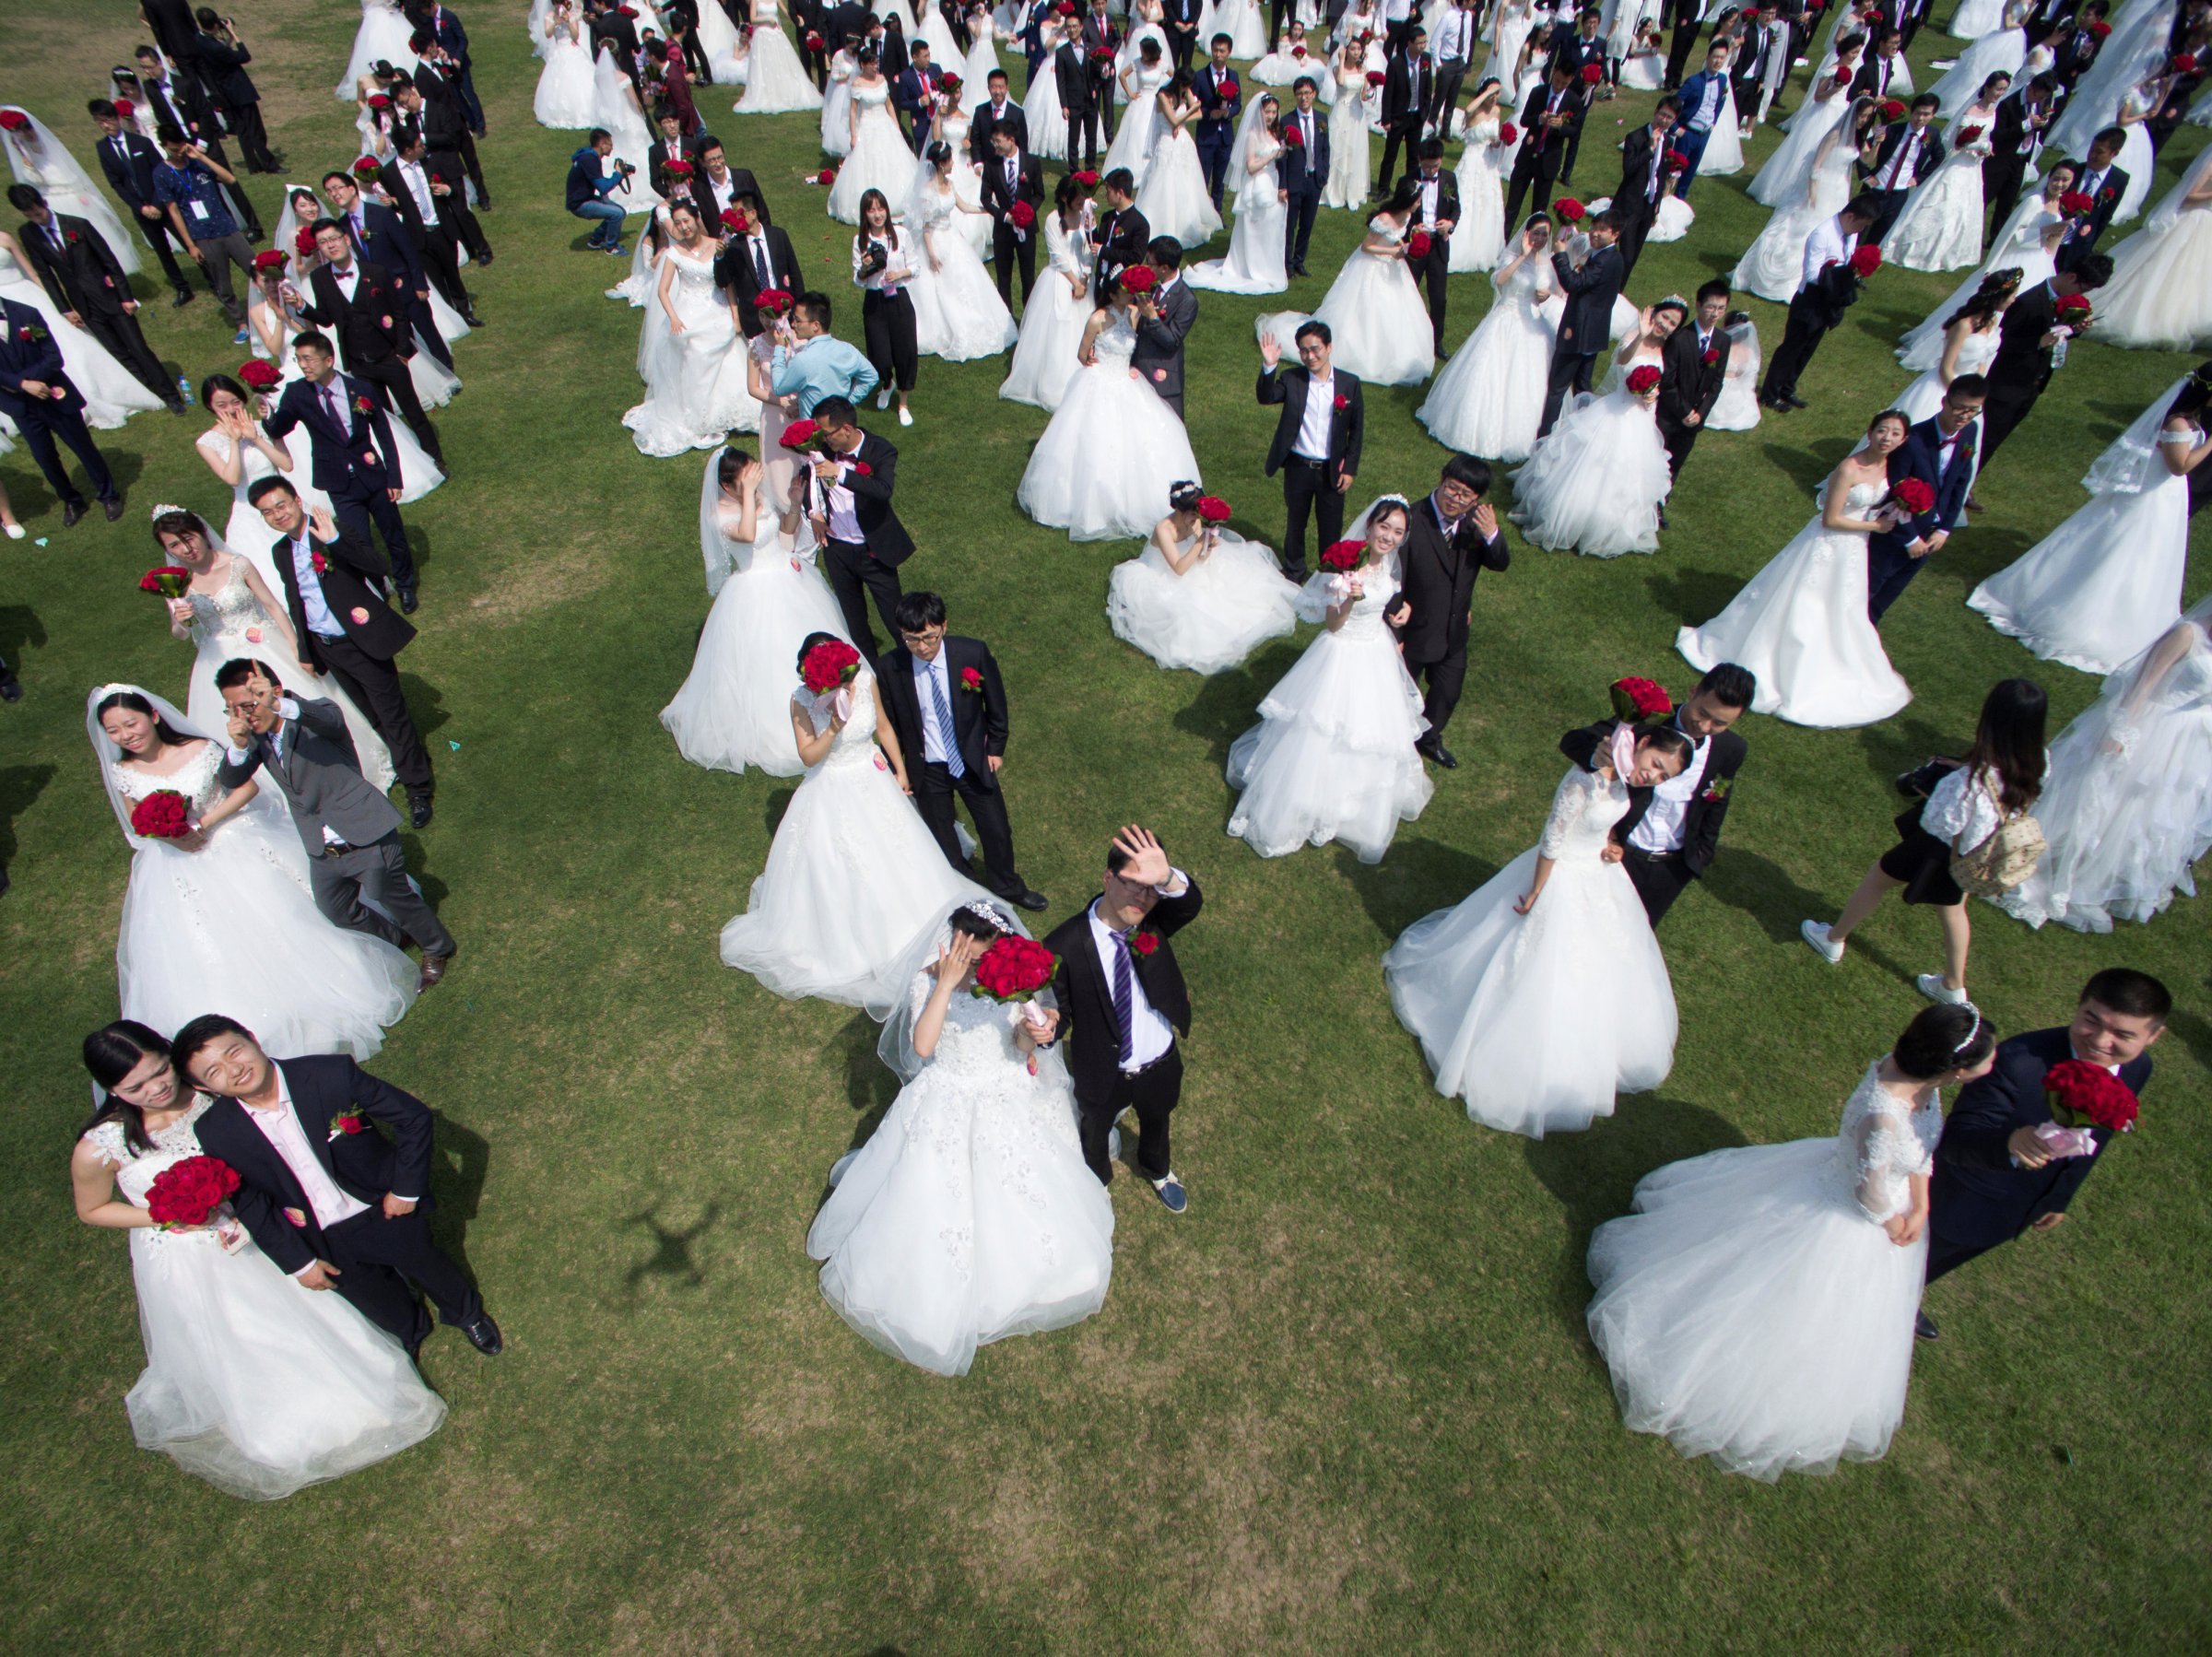 Newlywed couples attend a mass wedding ceremony in Hangzhou